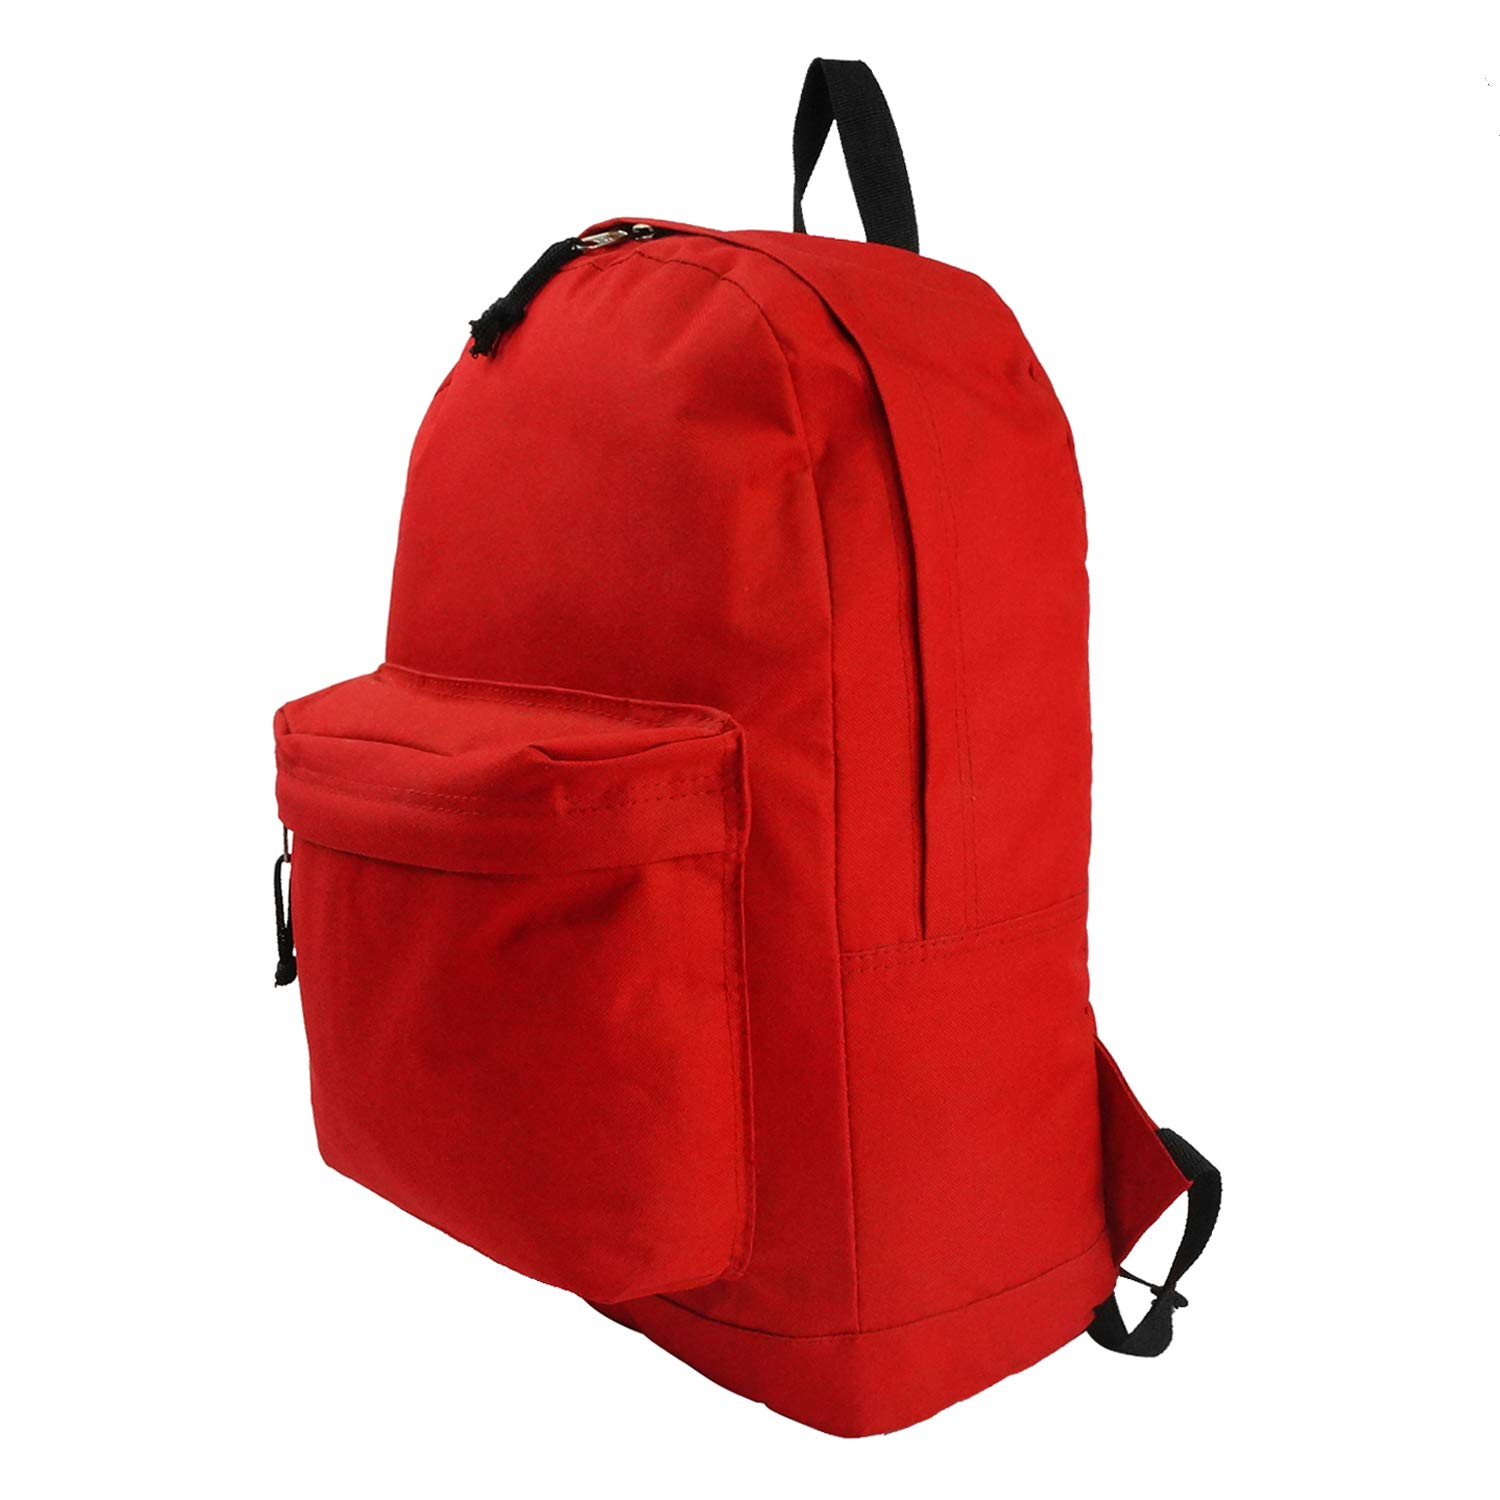 K-Cliffs Basic Emergency Survival Backpack Classic Simple School Book Bag Student Daily Daypack 18 Inch Red 18"x13"x16"